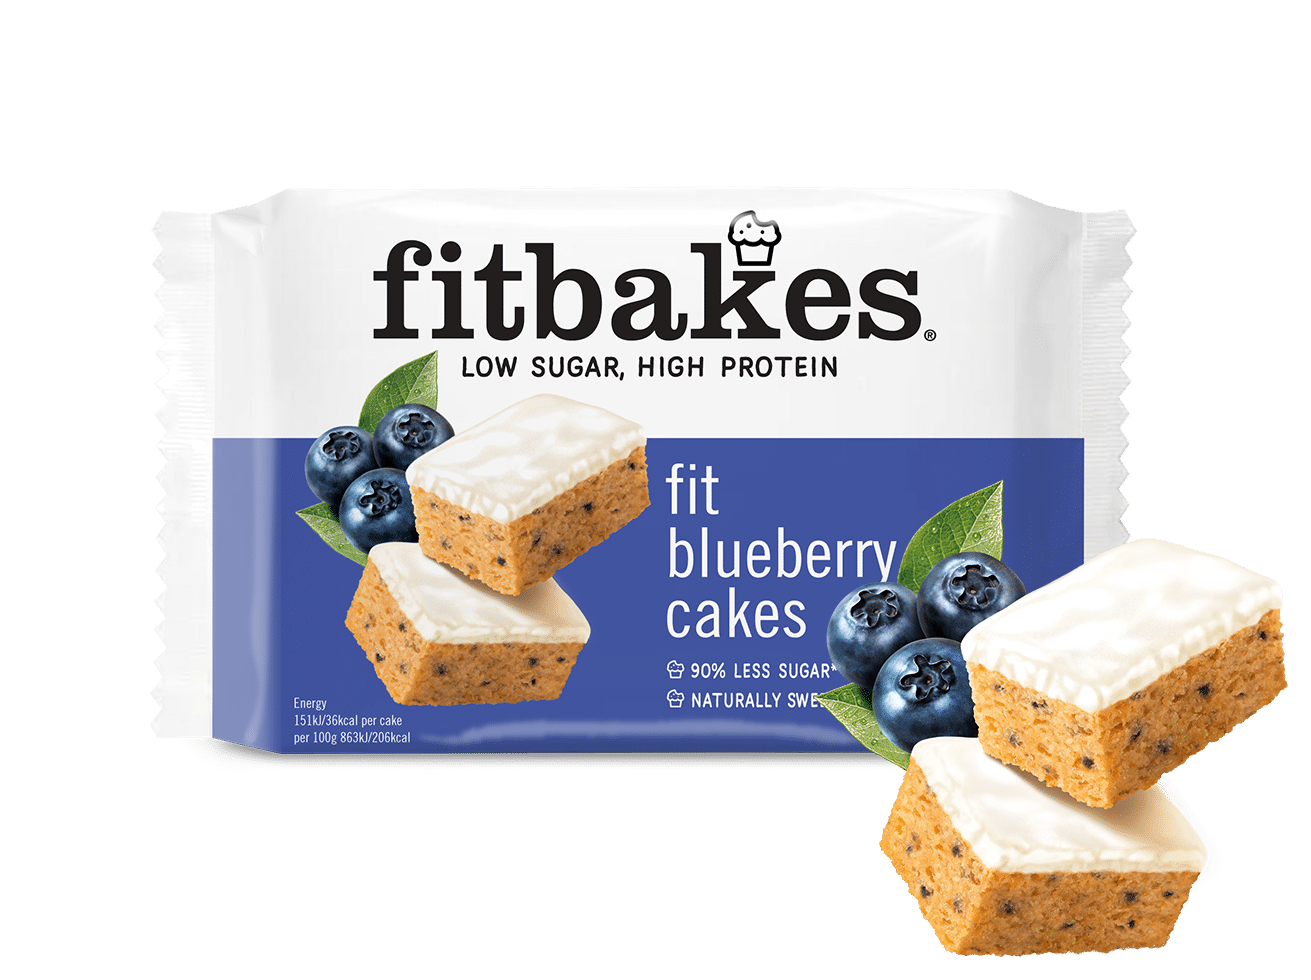 Fitbakes Blueberry Cakes Packaging